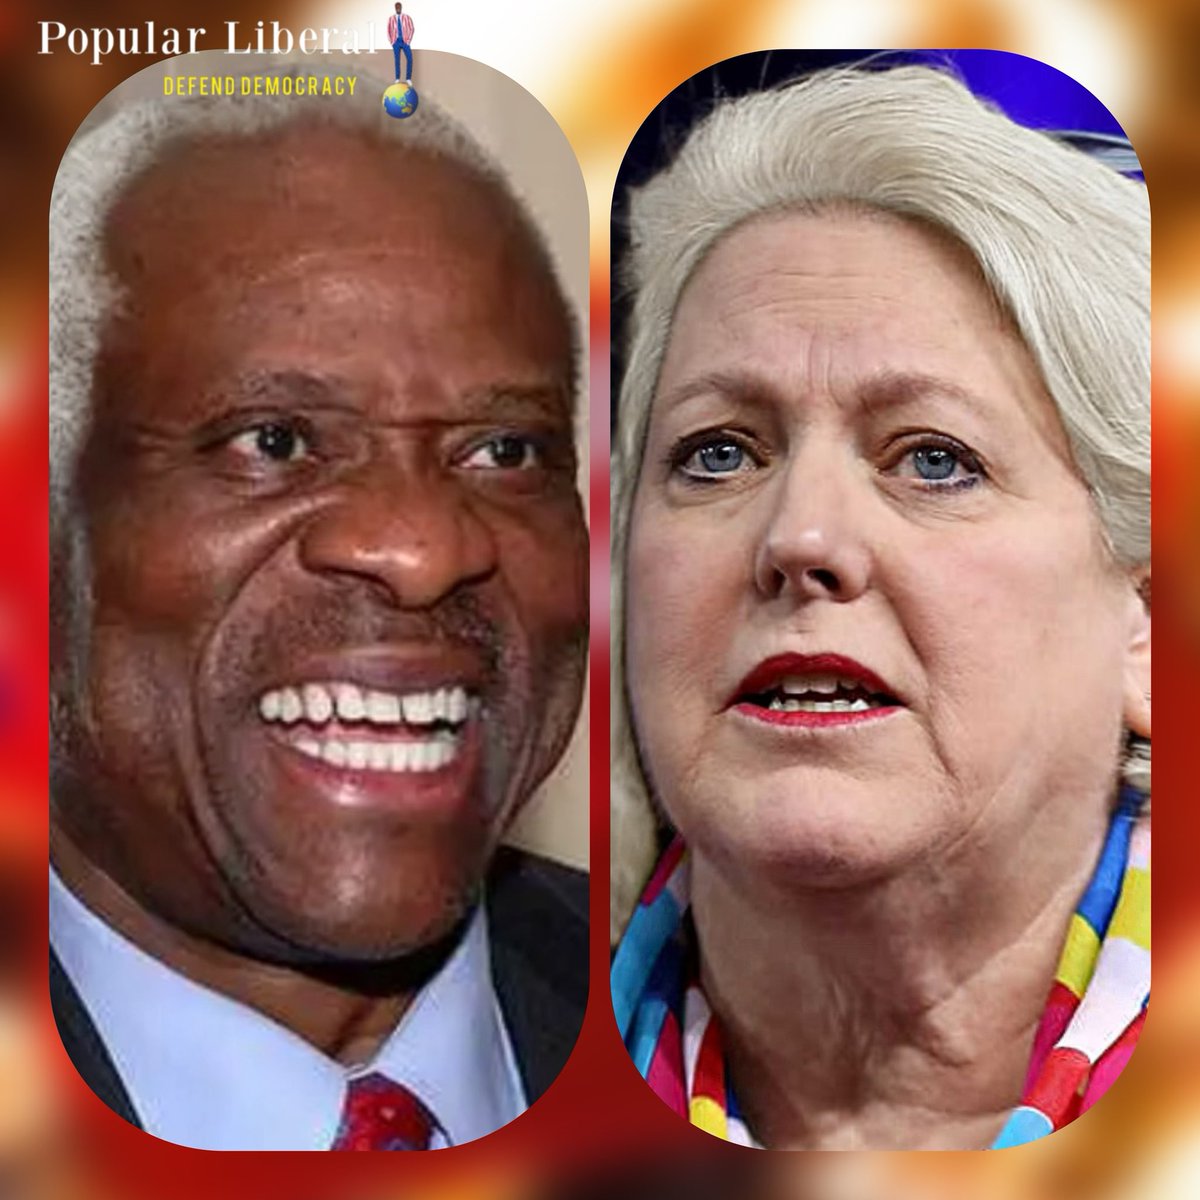 BREAKING: Judicial ethics experts are calling on Clarence Thomas to clarify why he did not recuse himself from Trump's immunity case, particularly given the actions of other justices in similar situations. The Supreme Court has to take into consideration that Thomas' wife,